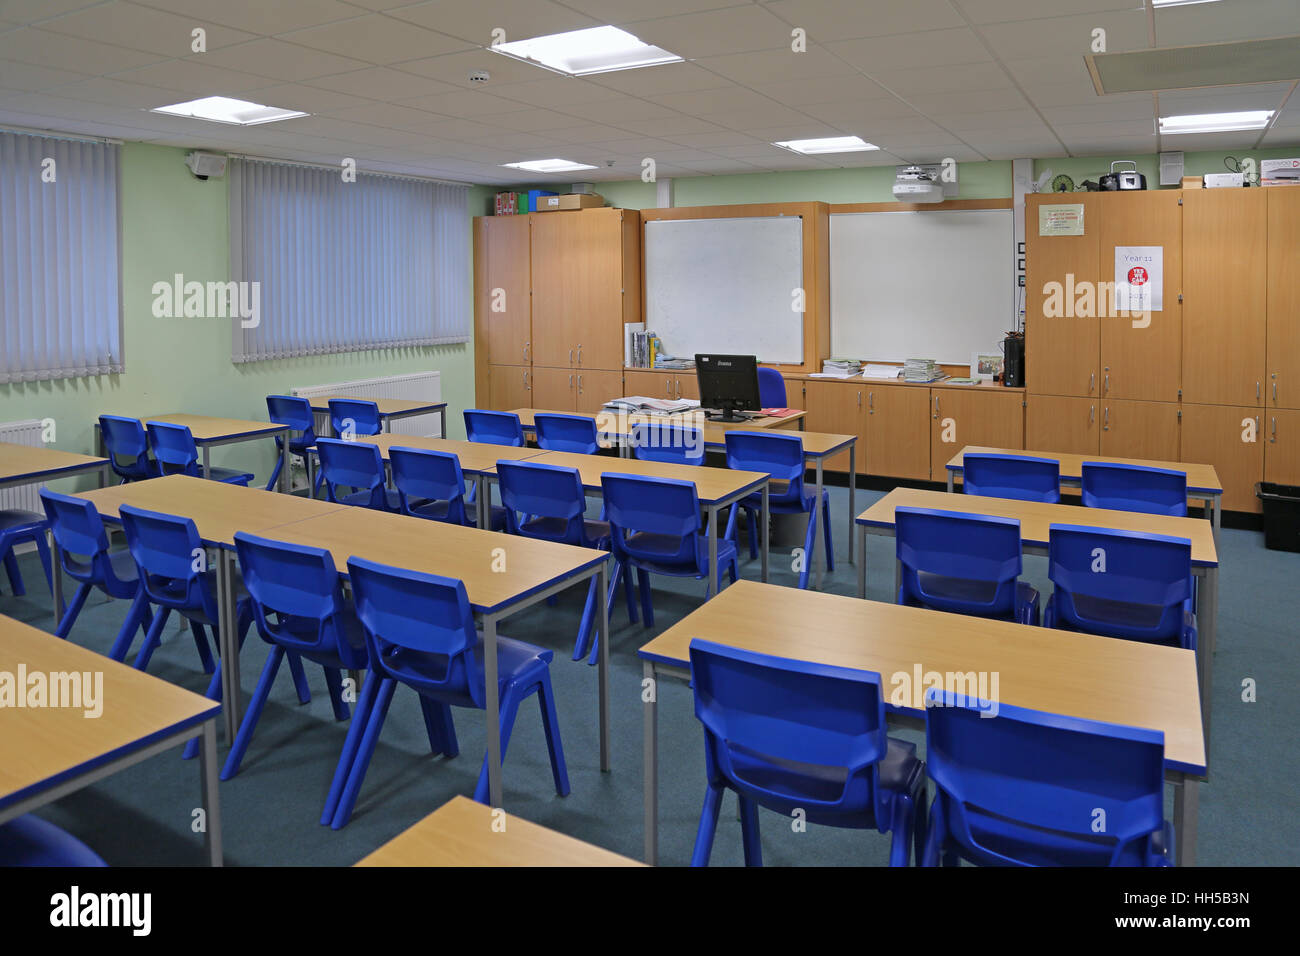 Wide-angle view of a newly built school classroom showing desks and chairs in a traditional layout, facing the teachers desk Stock Photo